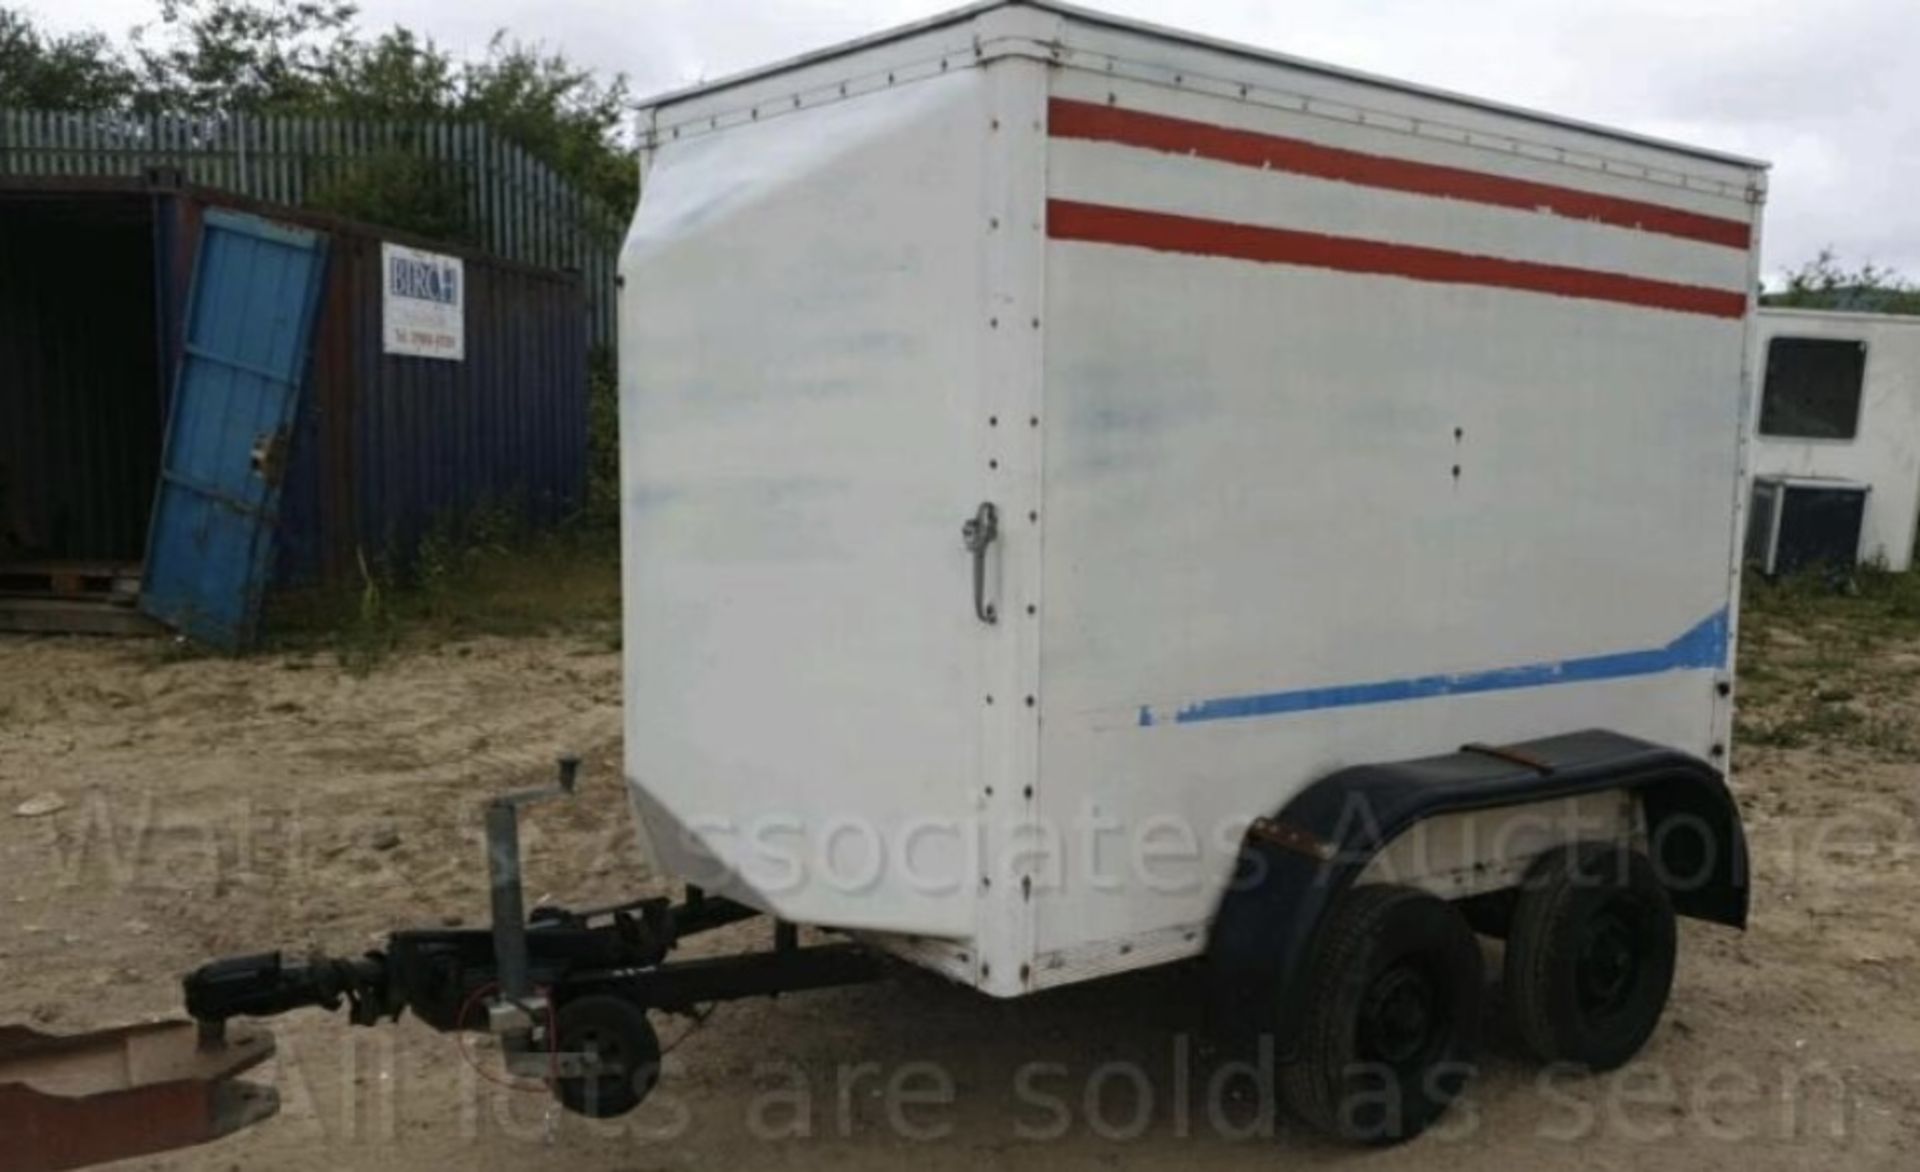 INDESPENSION TWIN AXLE BOX TRAILER TOW VAN *LOCATION NORTH YORKSHIRE* - Image 4 of 4